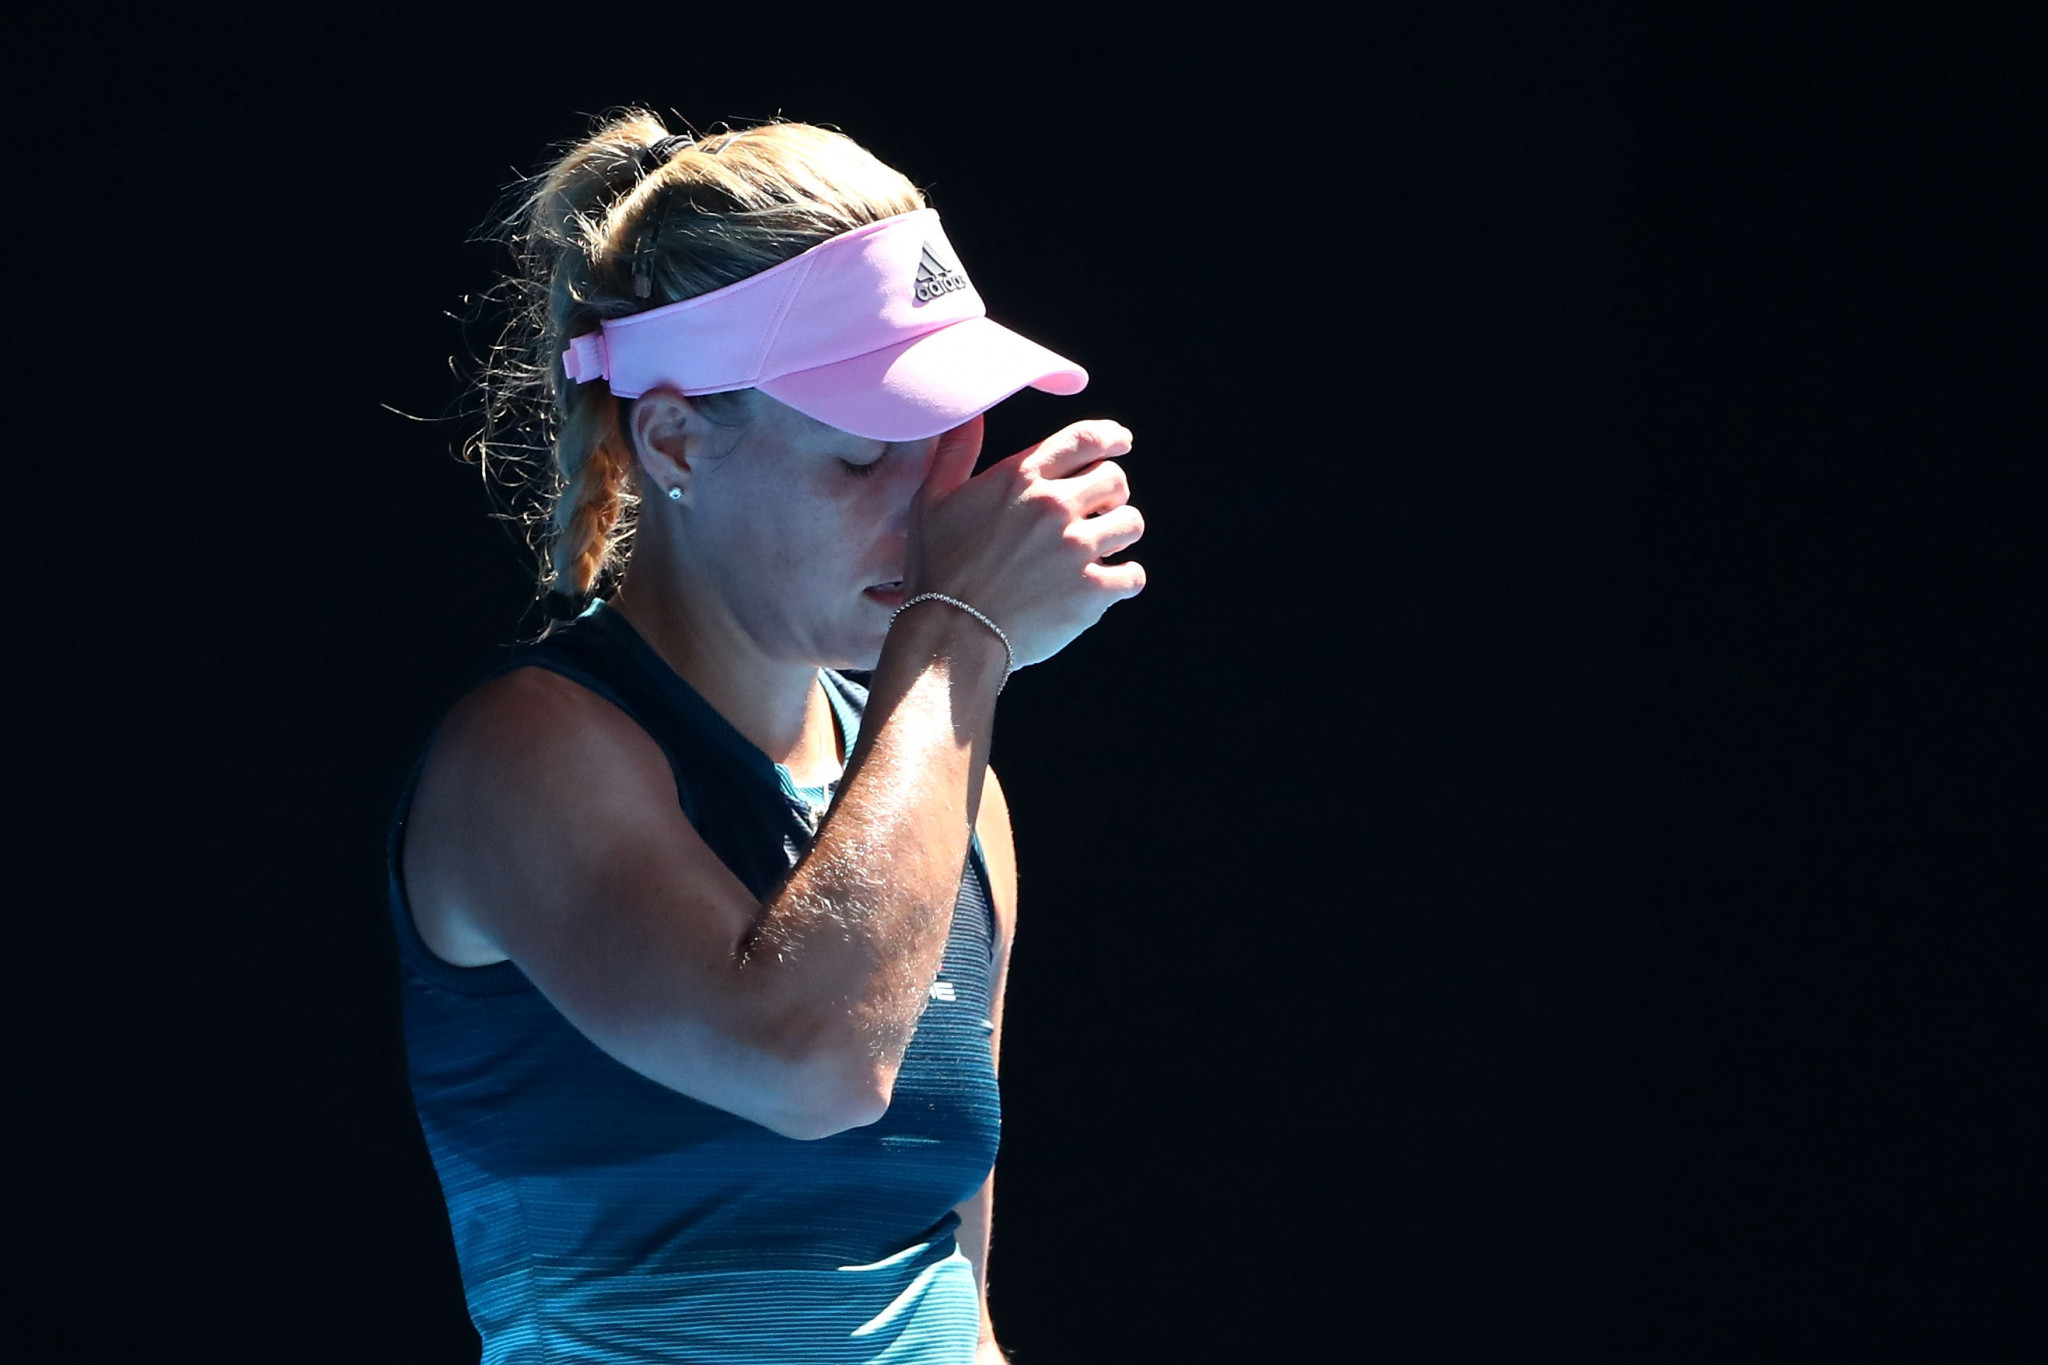 World number two Angelique Kerber suffered a surprise defeat ©Getty Images